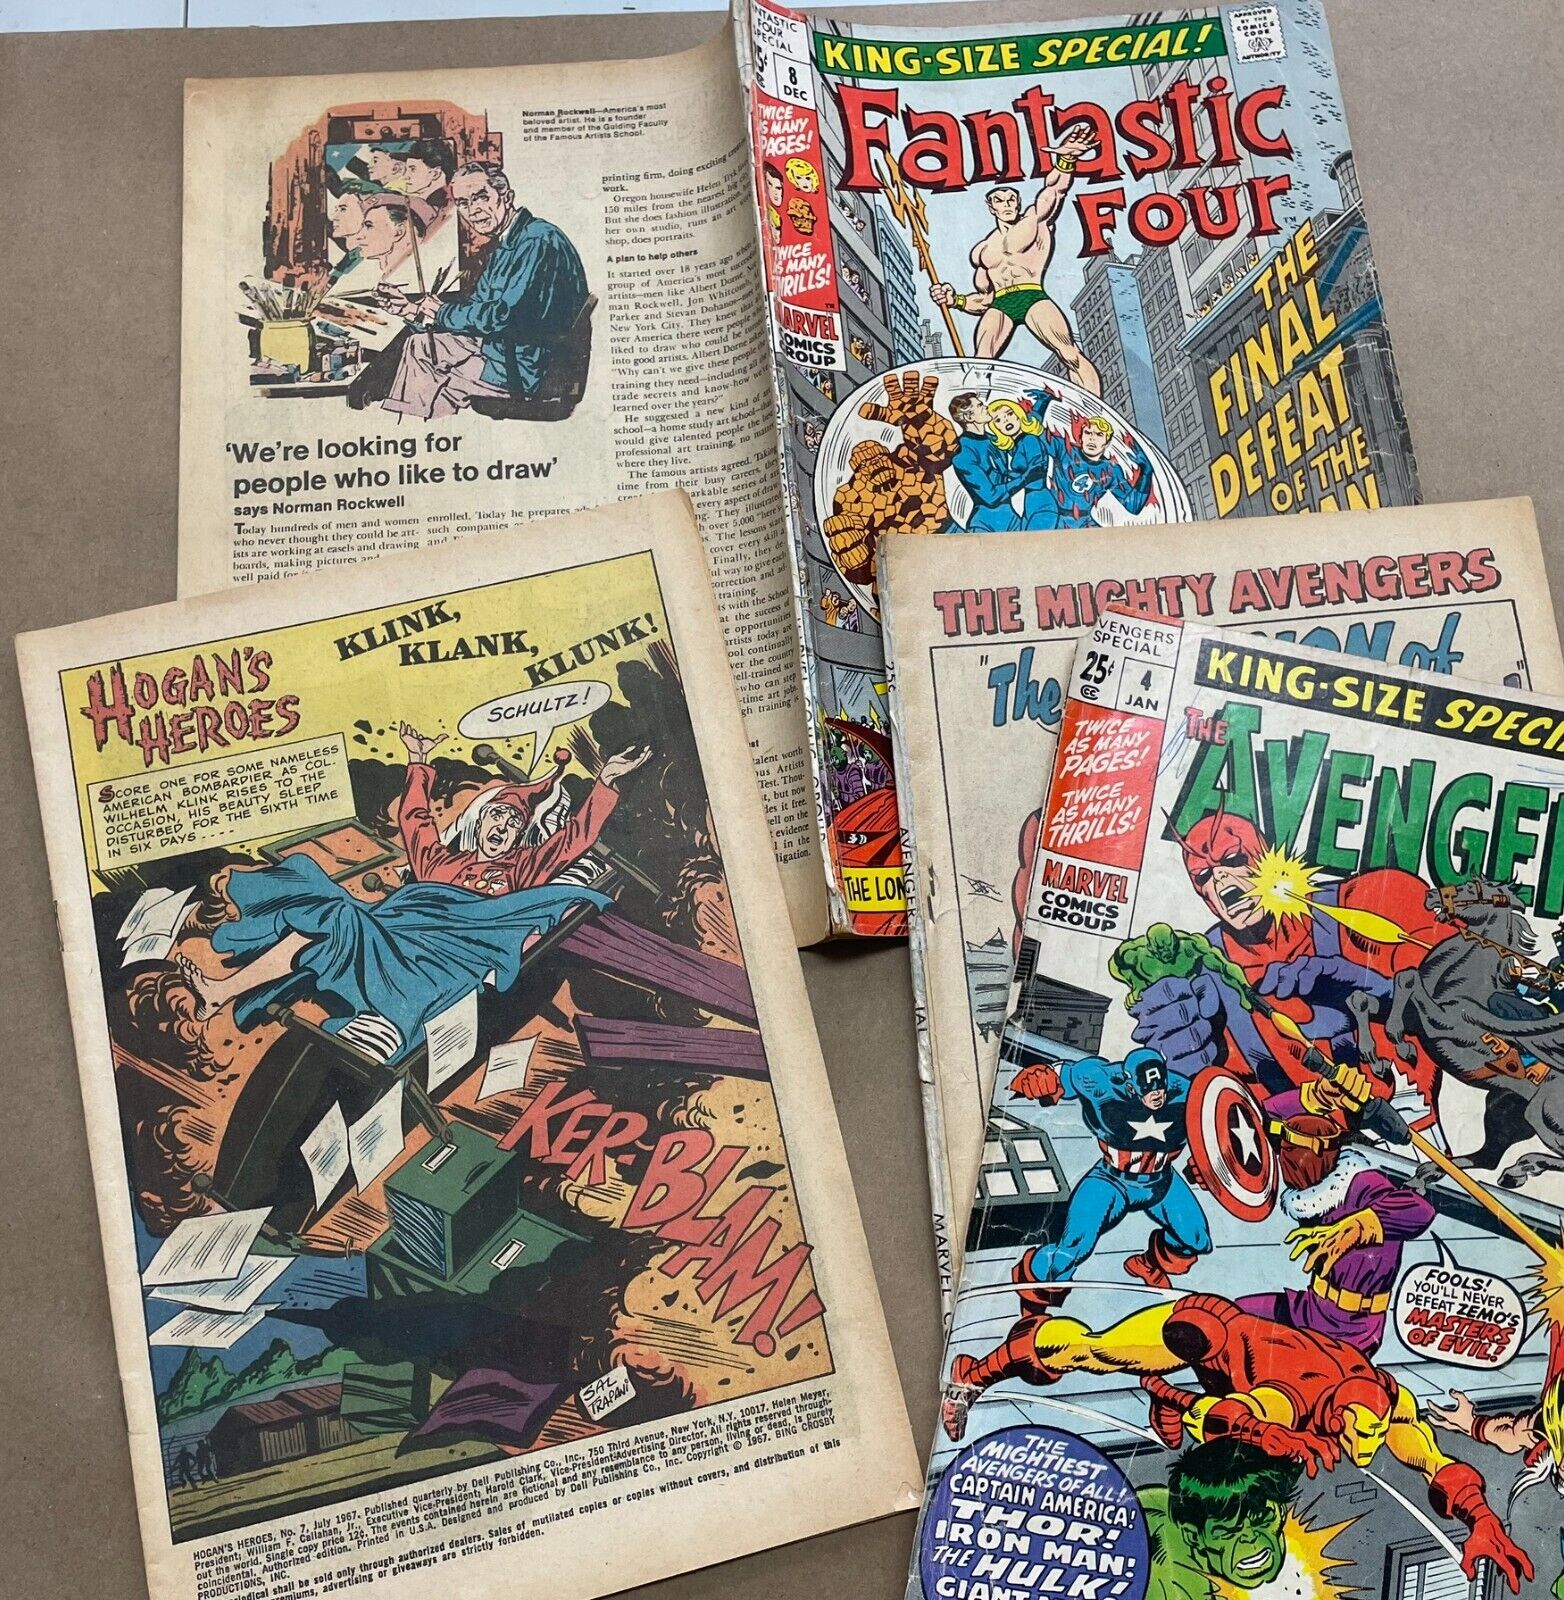 Fantastic Four & Avengers King Size Special. *Rare* Covers are off, rest is okay